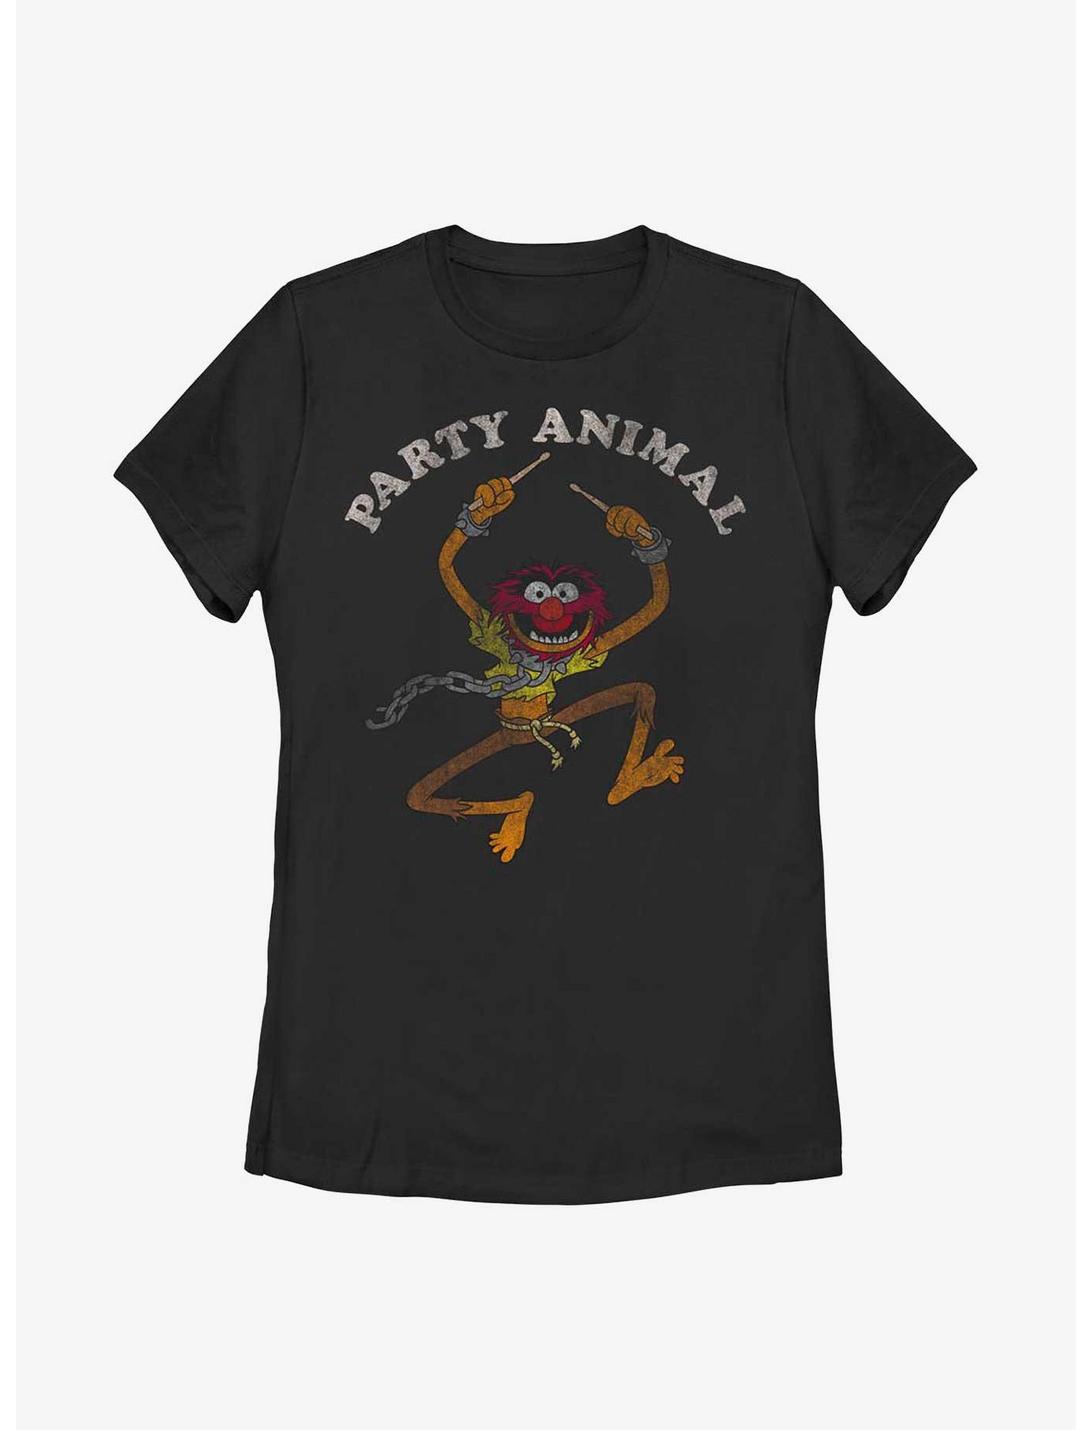 Disney The Muppets Party Animal Womens T-Shirt, BLACK, hi-res